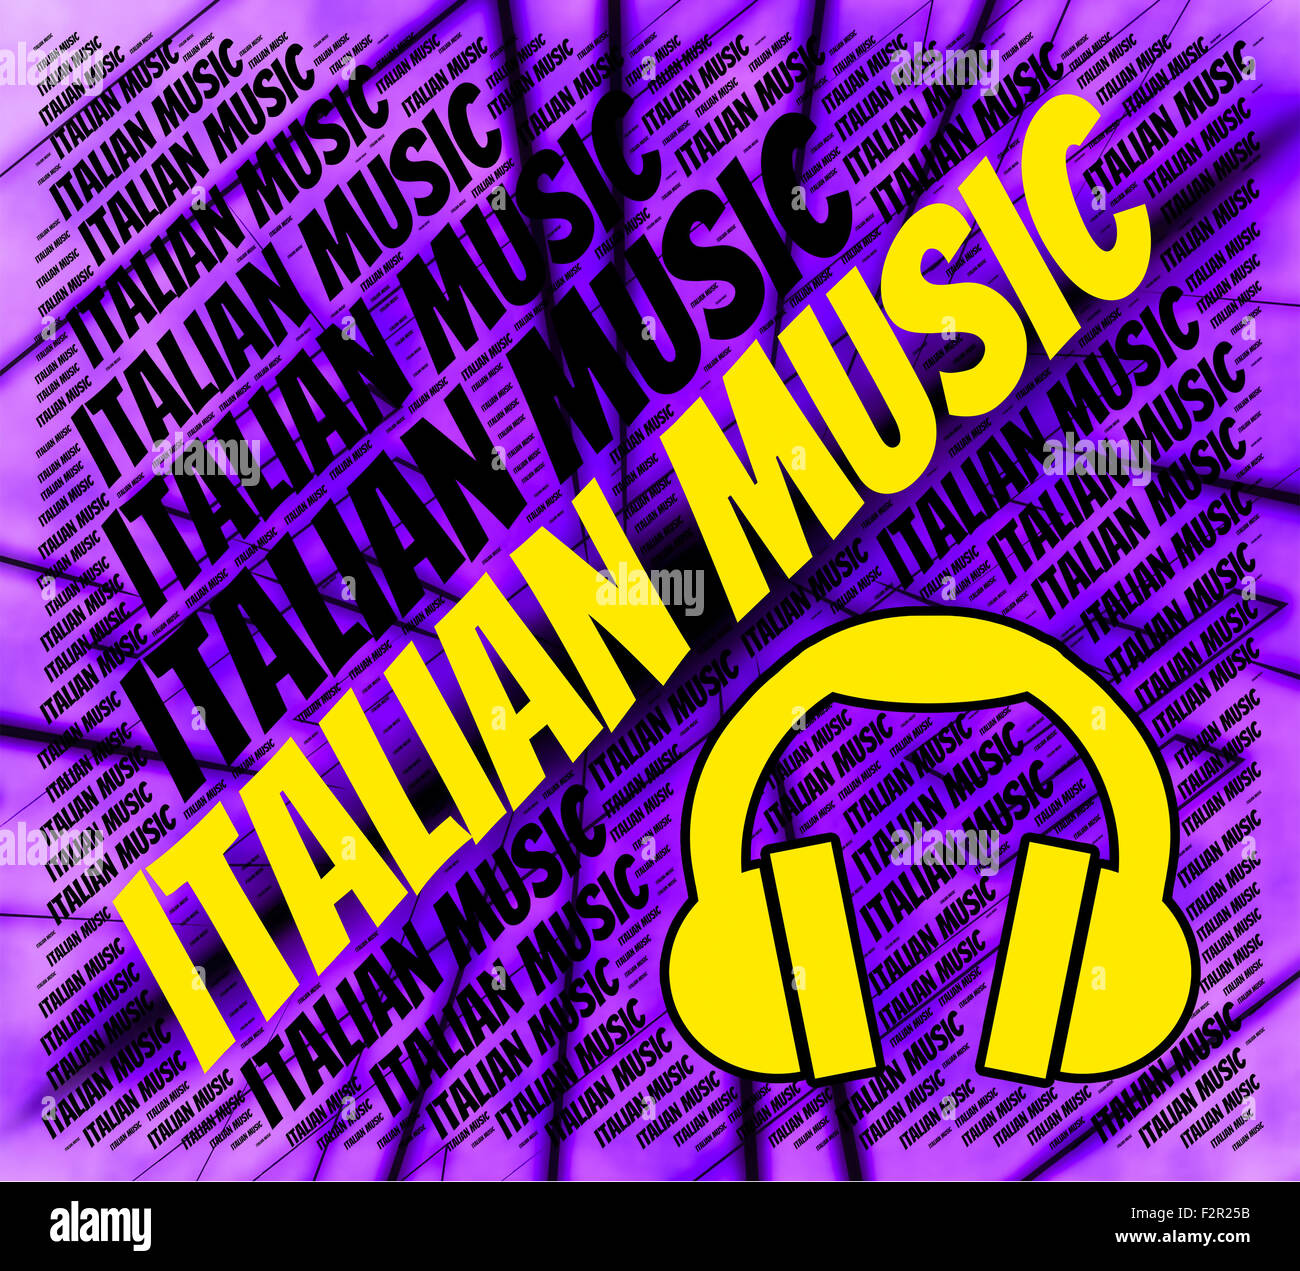 Italian Music Showing Sound Tracks And Soundtrack Stock Photo